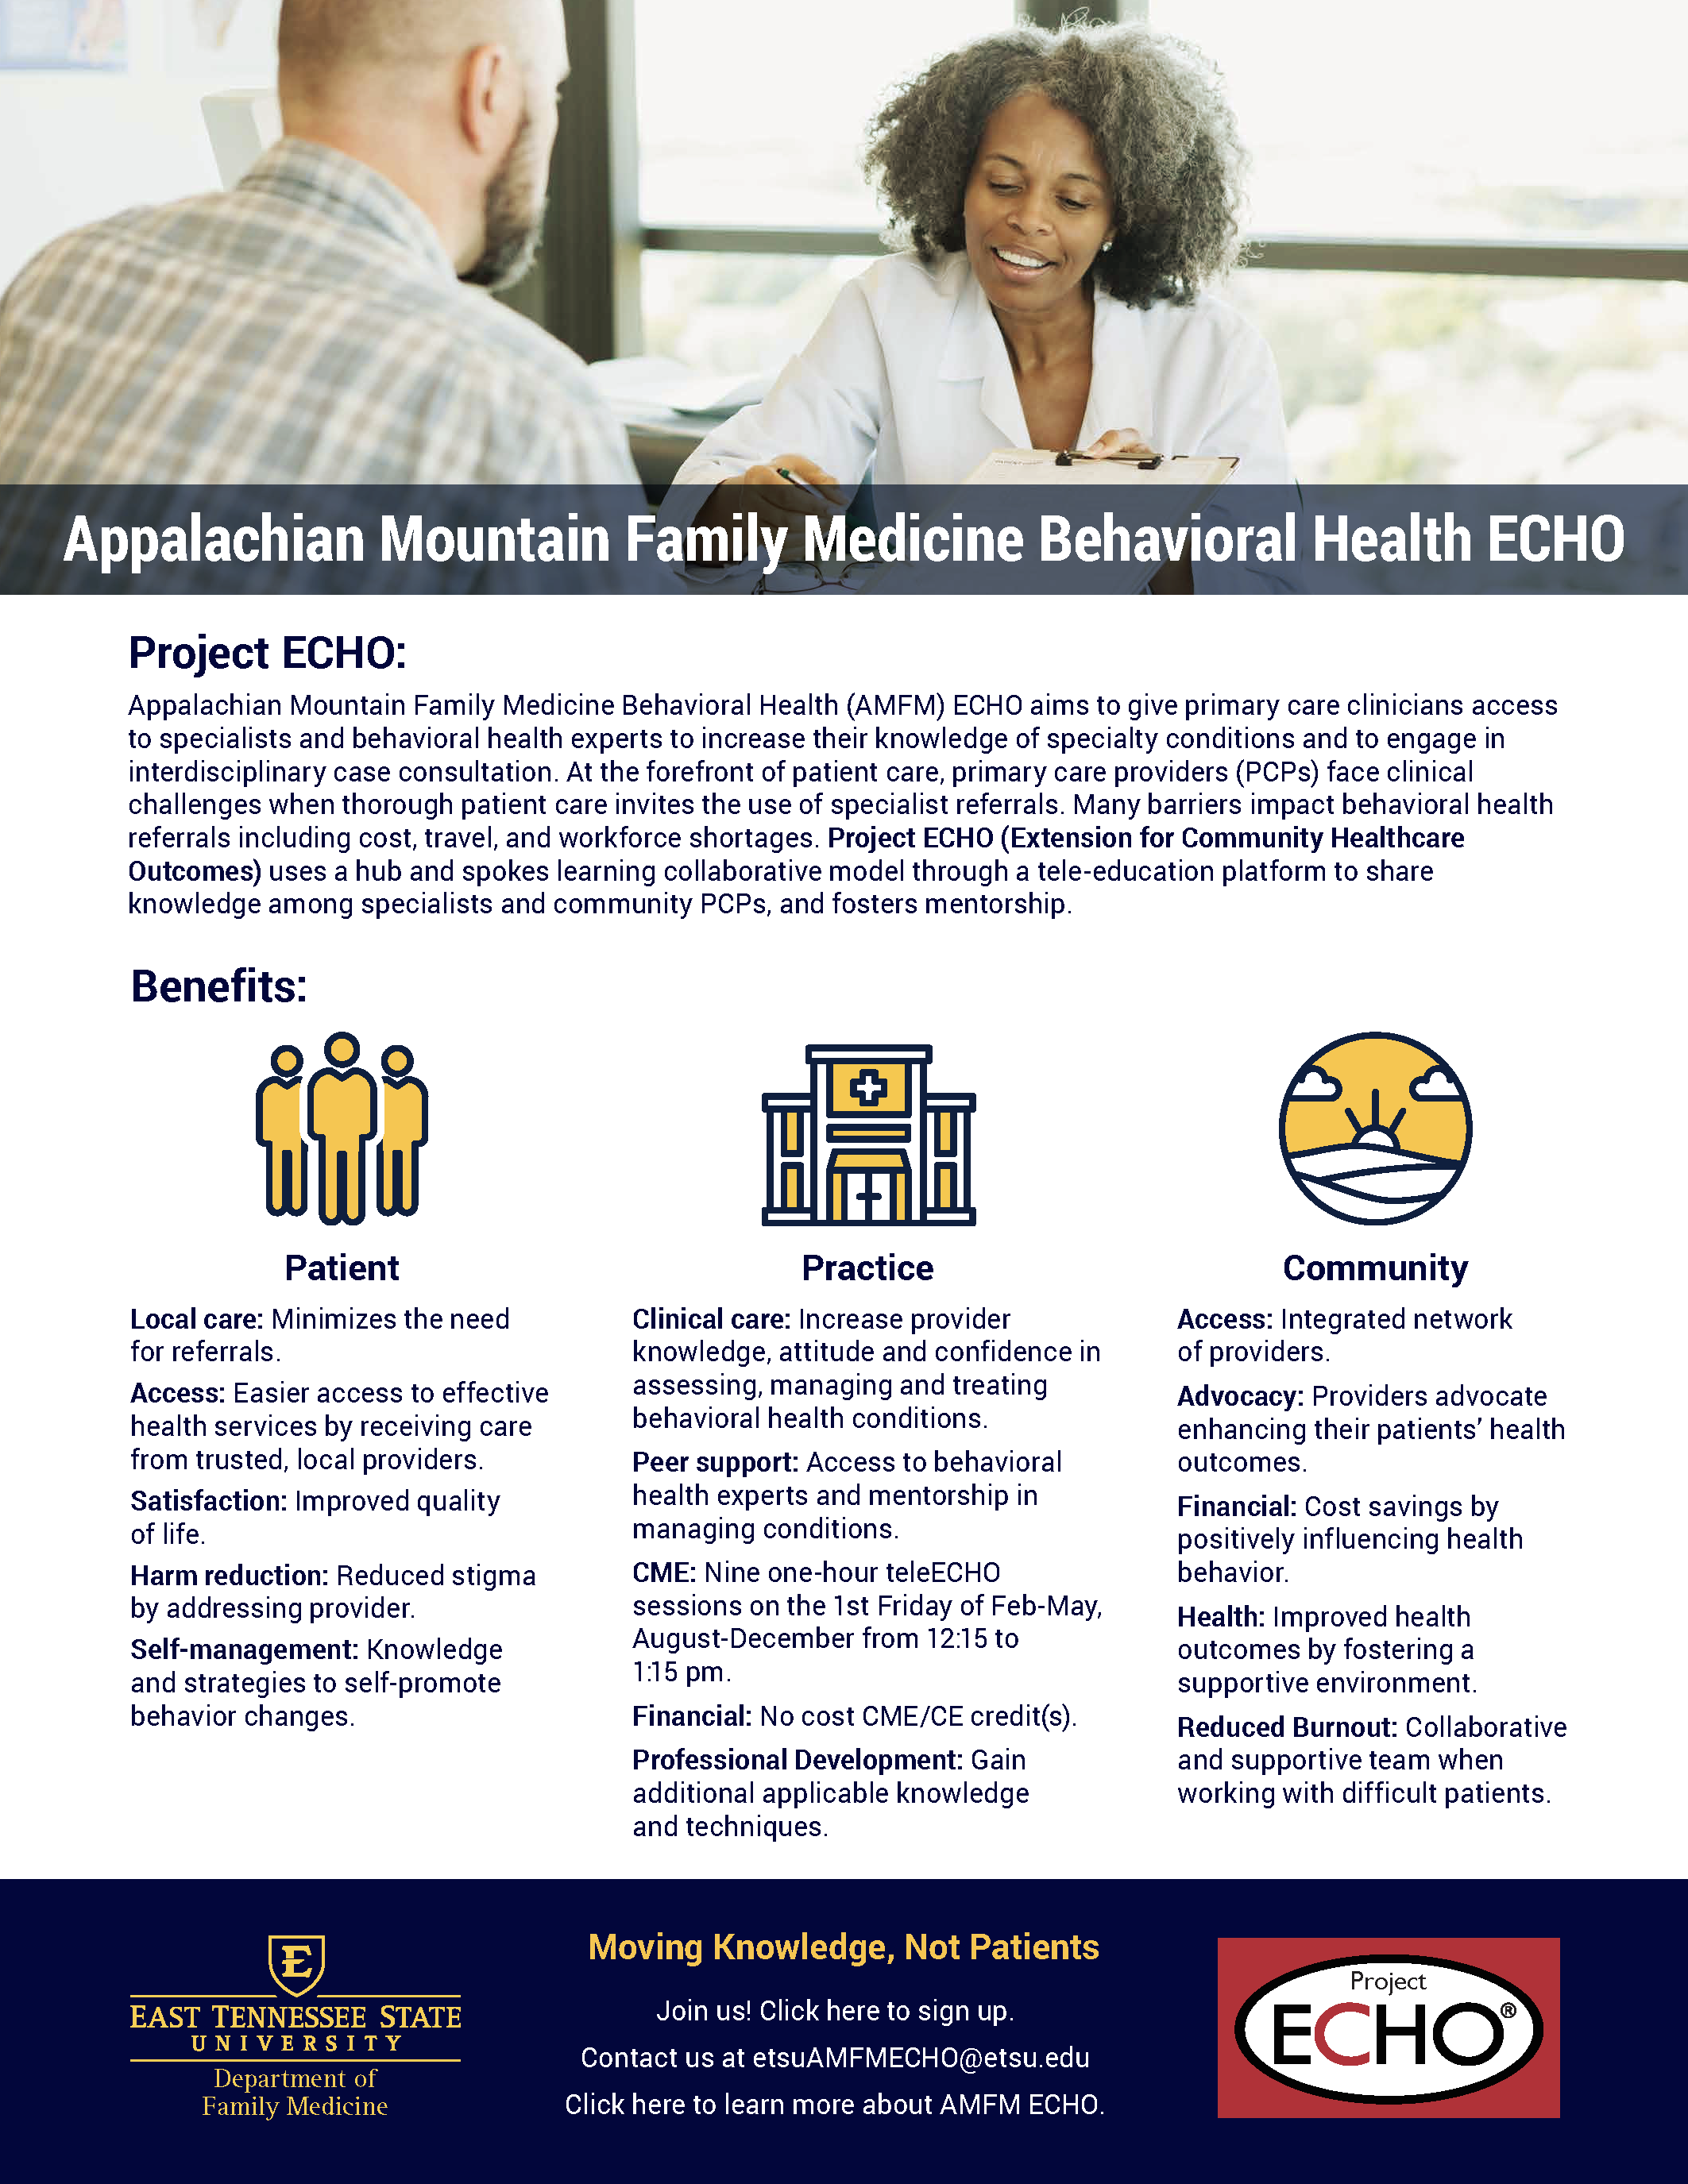 Appalachian Mountain Family Medicine Be havioral Health ECHO Project ECHO: Appalachian Mountain Family Medicine Behavioral Health (AMFM) ECHO aims to give primary care clinicians access to specialists and behavioral health experts to increase their knowledge of specialty conditions and to engage in interdisciplinary case consultation. At the forefront of patient care, primary care providers (PCPs) face clinical challenges when thorough patient care invites the use of specialist referrals. Many barriers impact behavioral health referrals including cost, travel, and workforce shortages. Project ECHO (Extension for Community Healthcare Outcomes) uses a hub and spokes learning collaborative model through a tele-education platform to share knowledge among specialists and community PCPs, and fosters mentorship. Benefits: Patient Practice Community Local care: Minimizes the need for referrals. Access: Easier access to effective health services by receiving care from trusted, local providers. Satisfaction: Improved quality of life. Harm reduction: Reduced stigma by addressing provider. Self-management: Knowledge and strategies to self-promote behavior changes. Access: Integrated network of providers. Advocacy: Providers advocate enhancing their patients’ health outcomes. Financial: Cost savings by positively influencing health behavior. Health: Improved health outcomes by fostering a supportive environment. Reduced Burnout: Collaborative and supportive team when working with difficult patients. Clinical care: Increase provider knowledge, attitude and confidence in assessing, managing and treating behavioral health conditions. Peer support: Access to behavioral health experts and mentorship in managing conditions. CME: Nine one-hour teleECHO sessions on the 1st Friday of Feb-May, August-December from 12:15 to 1:15 pm. Financial: No cost CME/CE credit(s). Professional Development: Gain additional applicable knowledge and techniques. Department of Family Medicine Moving Knowledge, Not Patients Join us! Click here to sign up. Contact us at etsuAMFMECHO@etsu.edu Click here to learn more about AMFM ECHO.